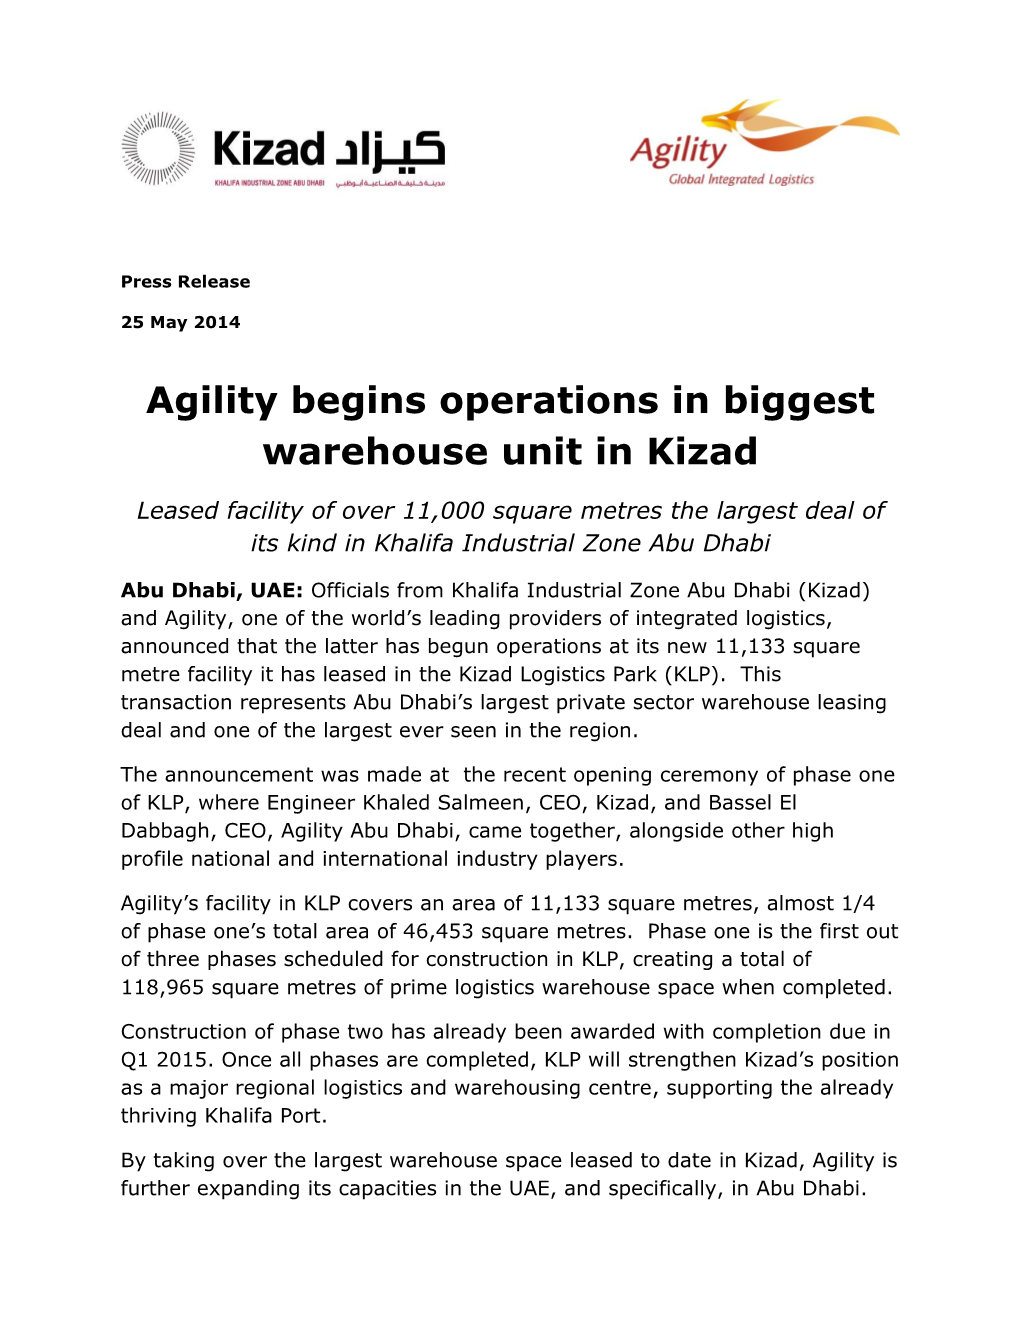 Agility Begins Operations in Biggest Warehouse Unit in Kizad